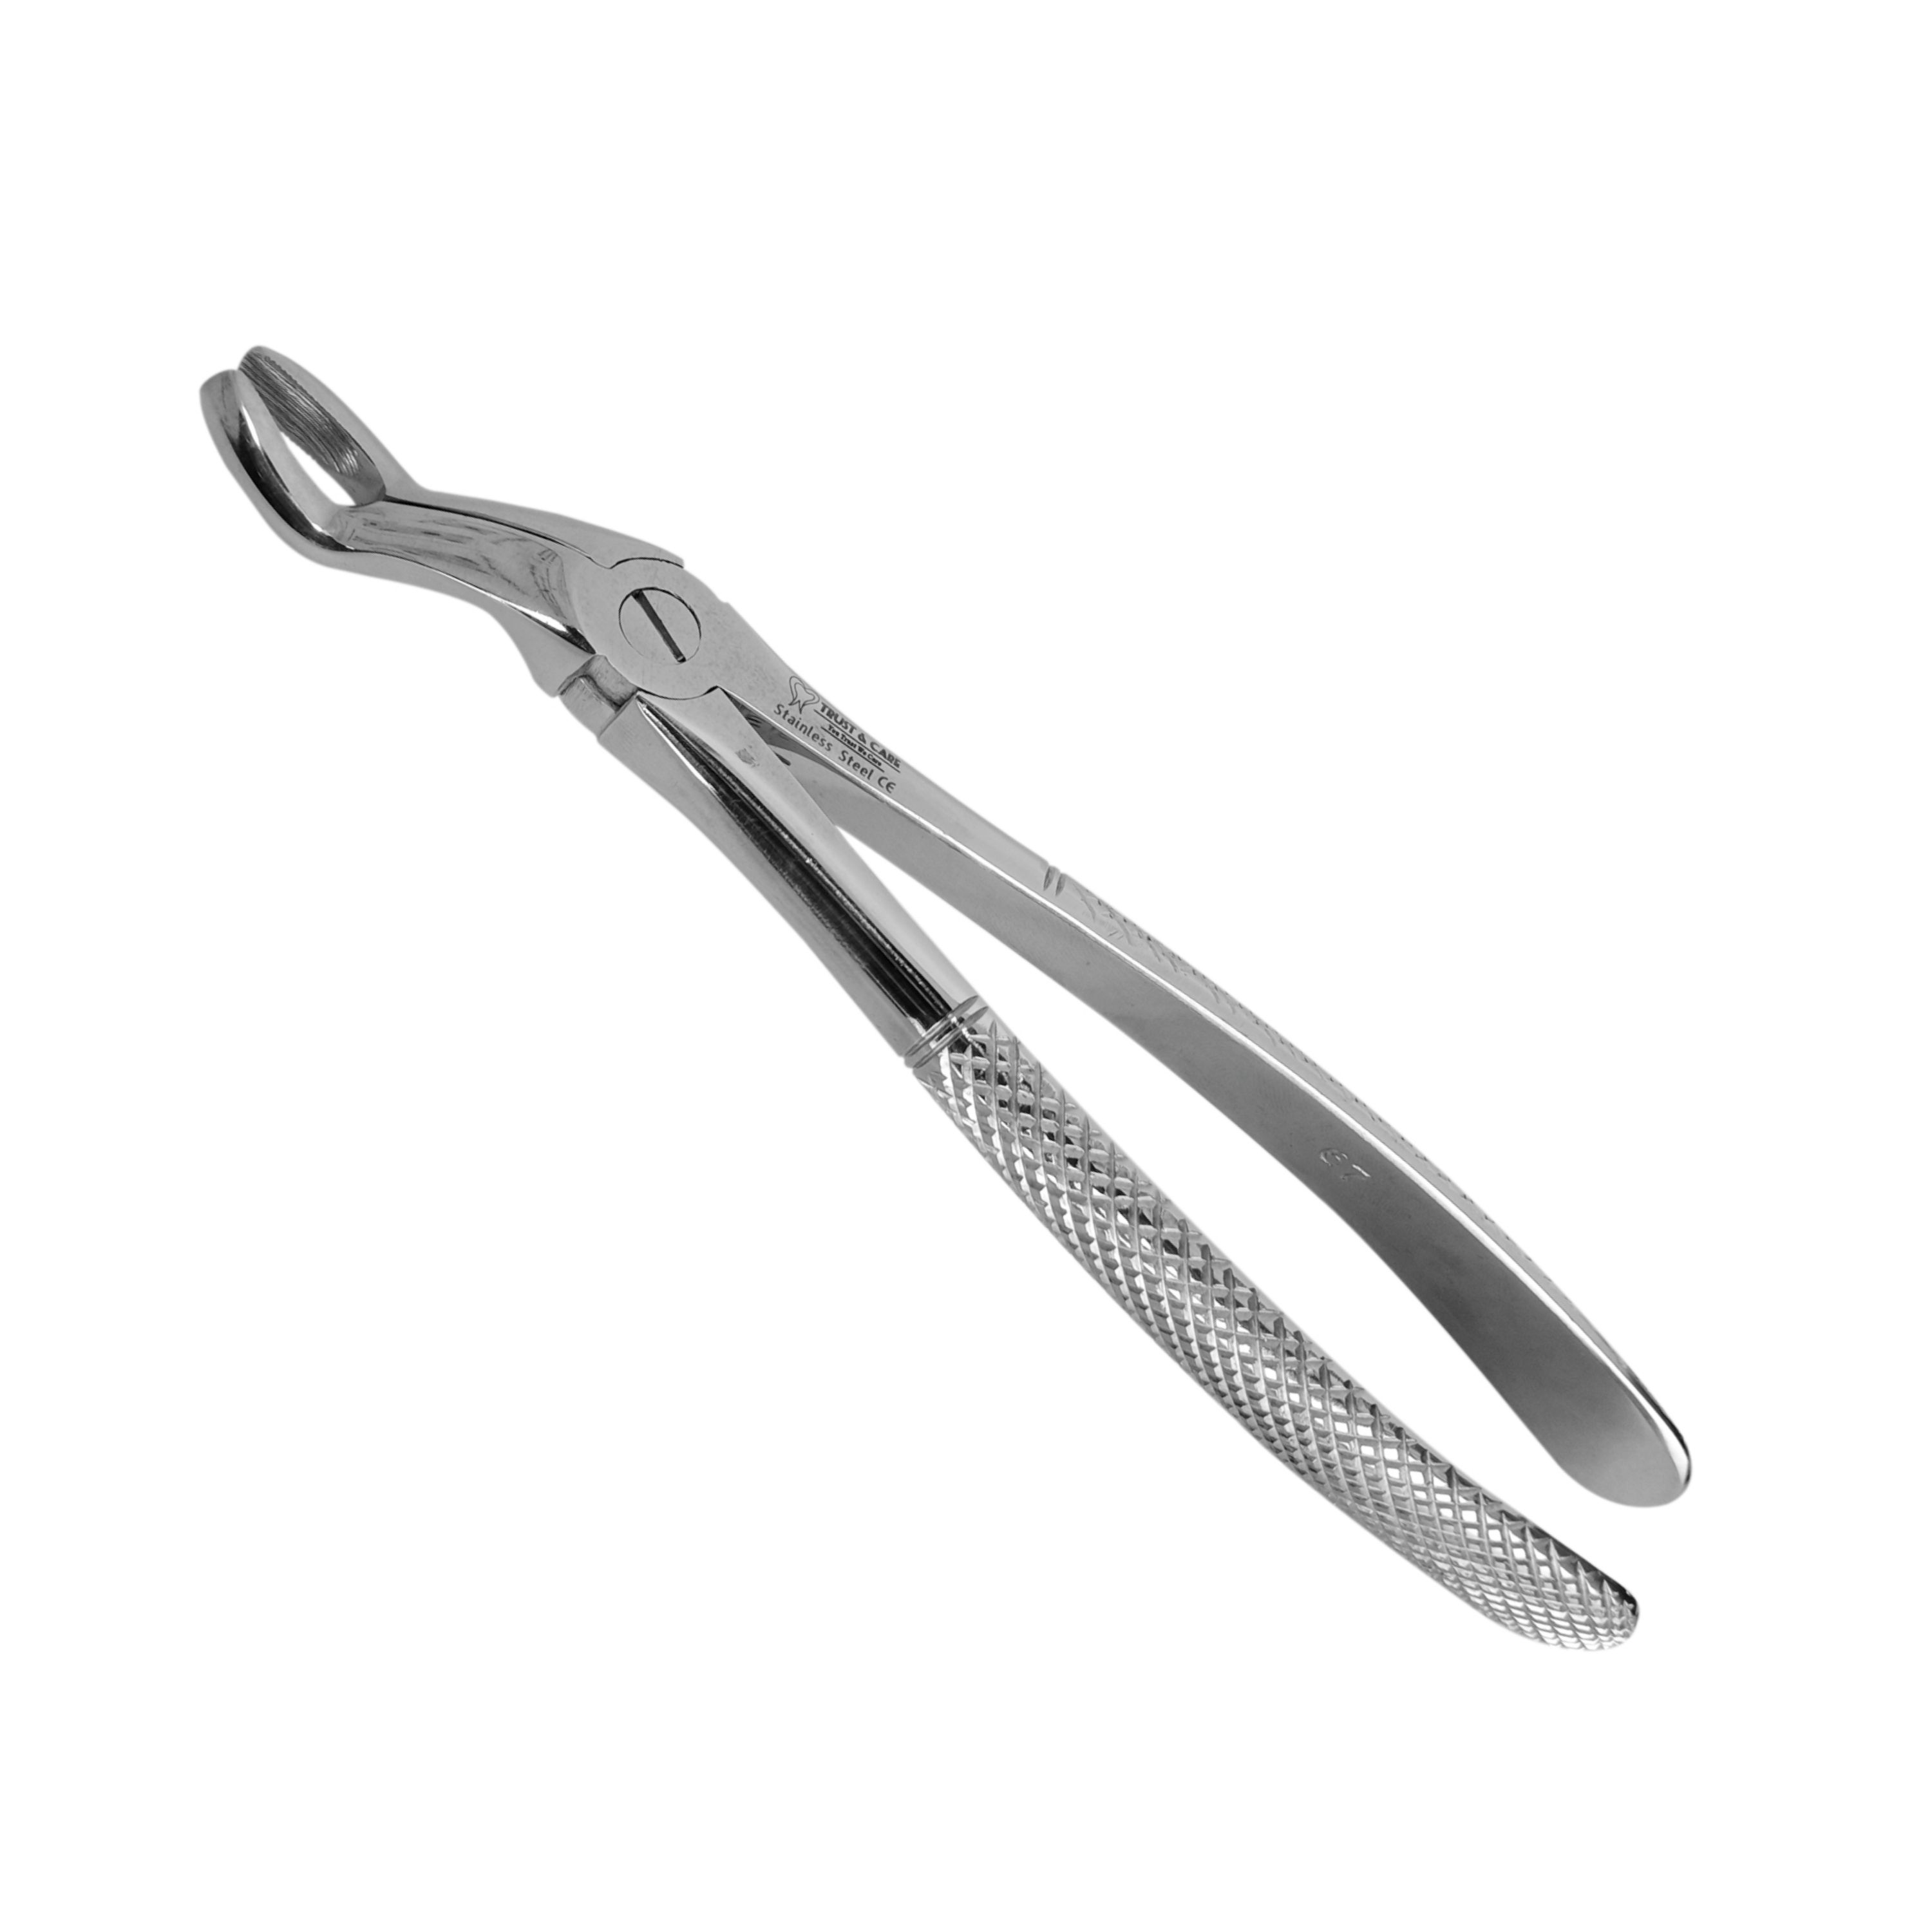 Trust & Care Tooth Extraction Forcep Upper Third Molar Fig No. 67A Standard